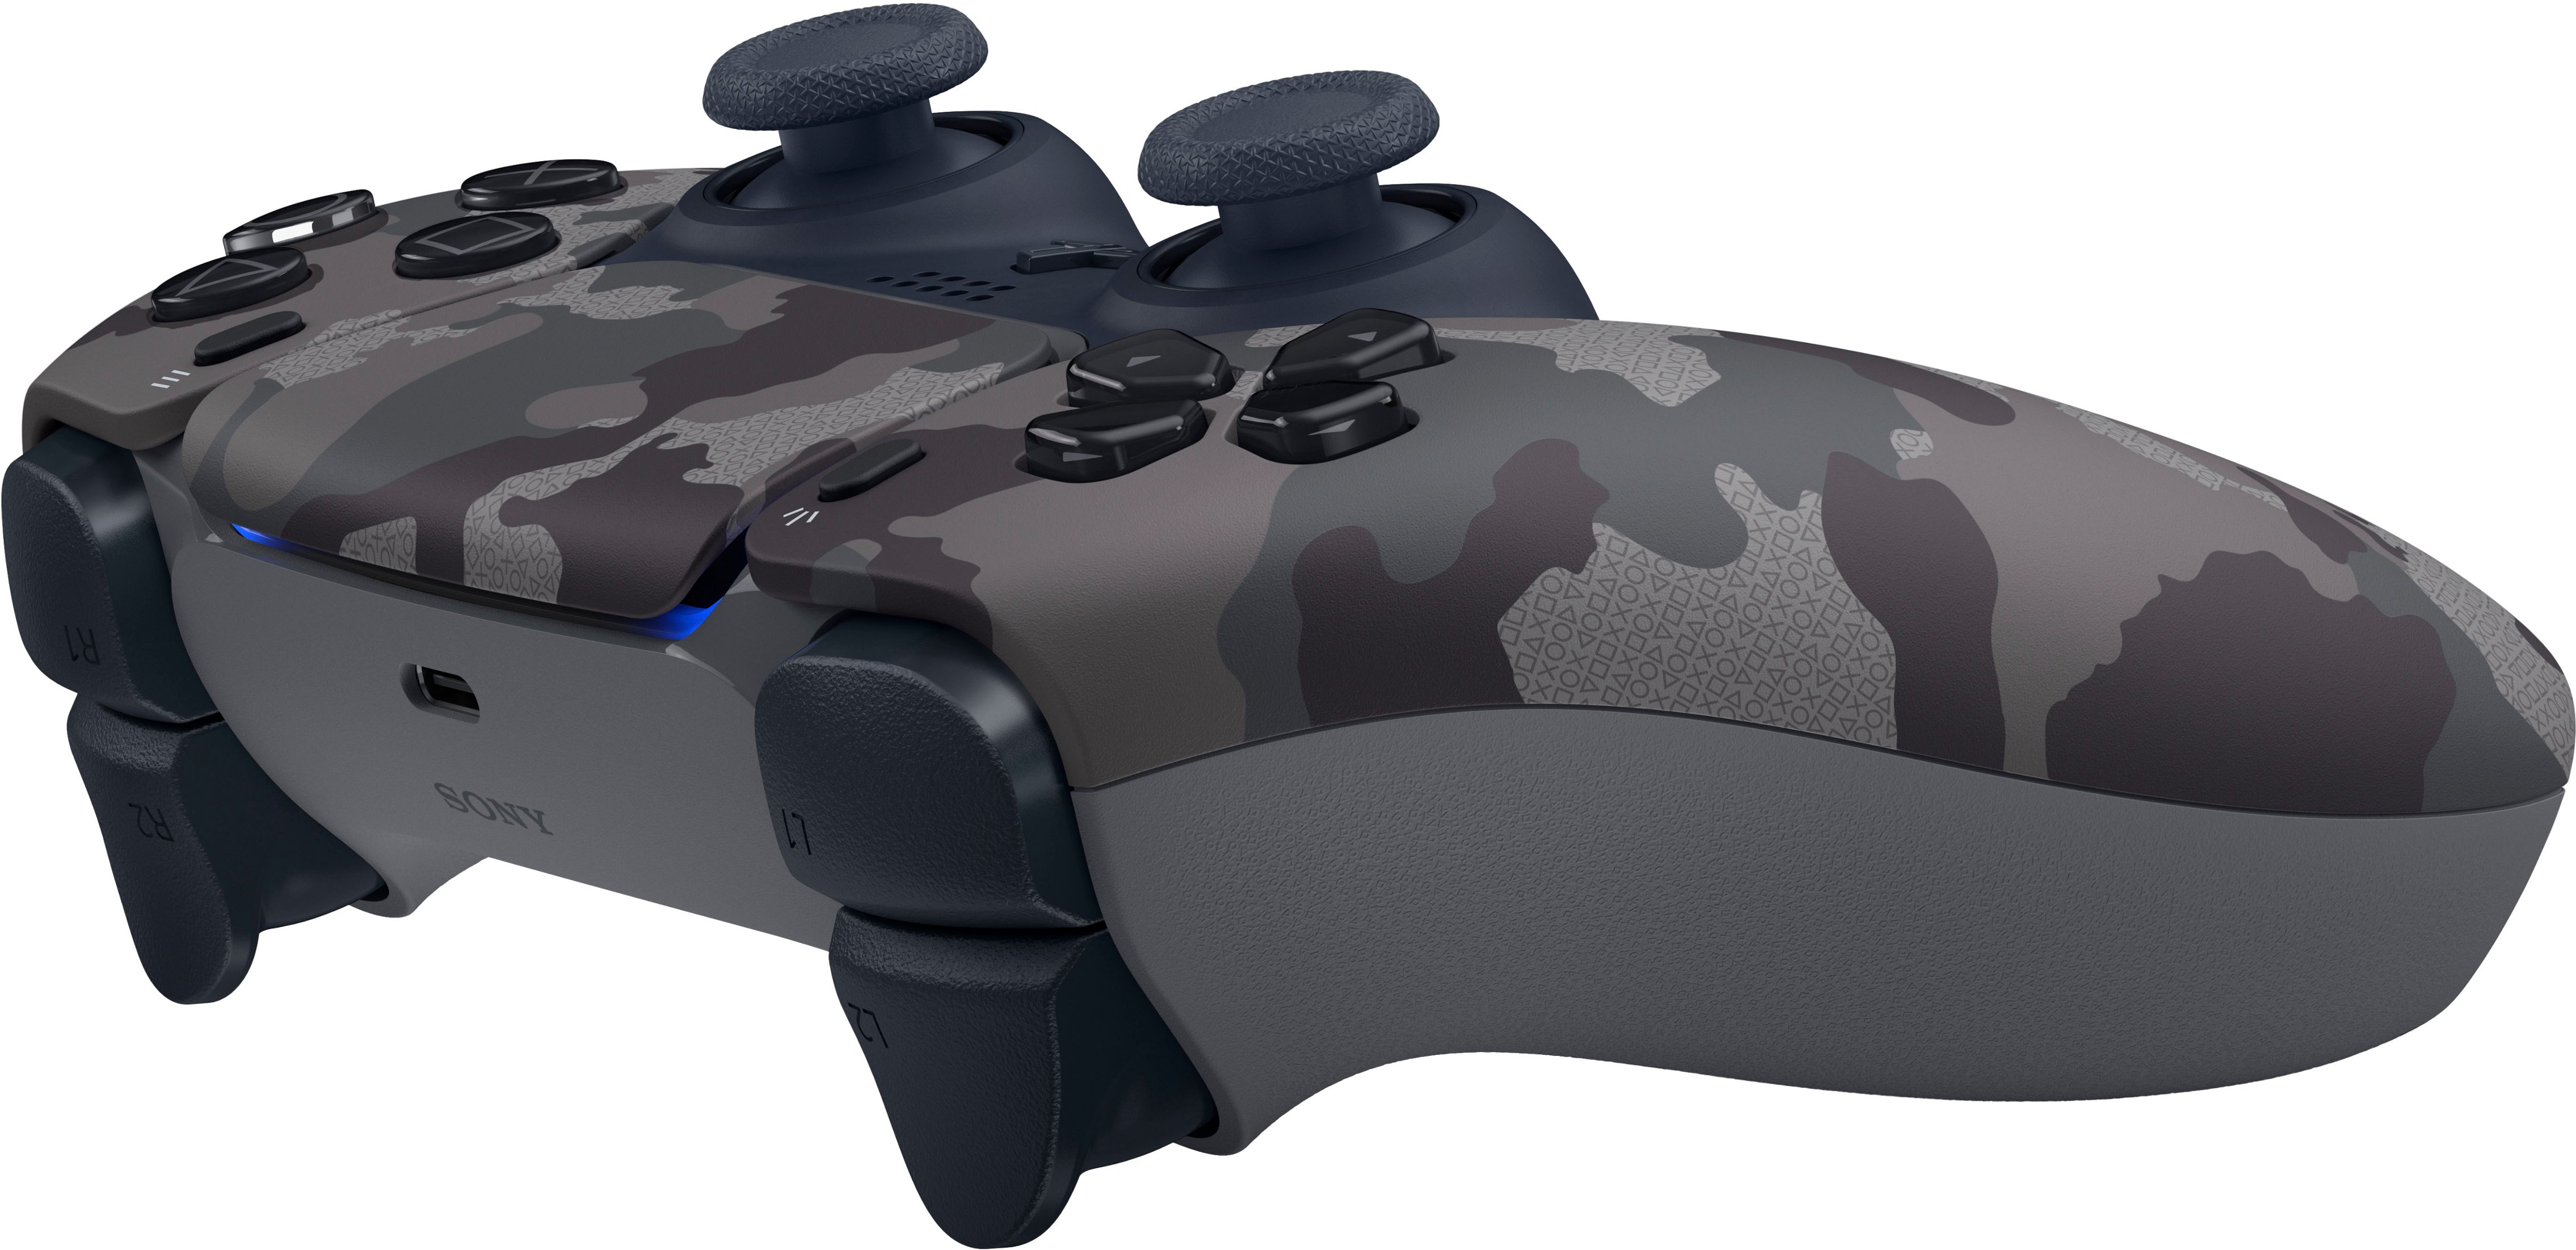 Sony PlayStation 5 DualSense Wireless Controller Gray Camouflage  1000039944/1000030611 - Best Buy